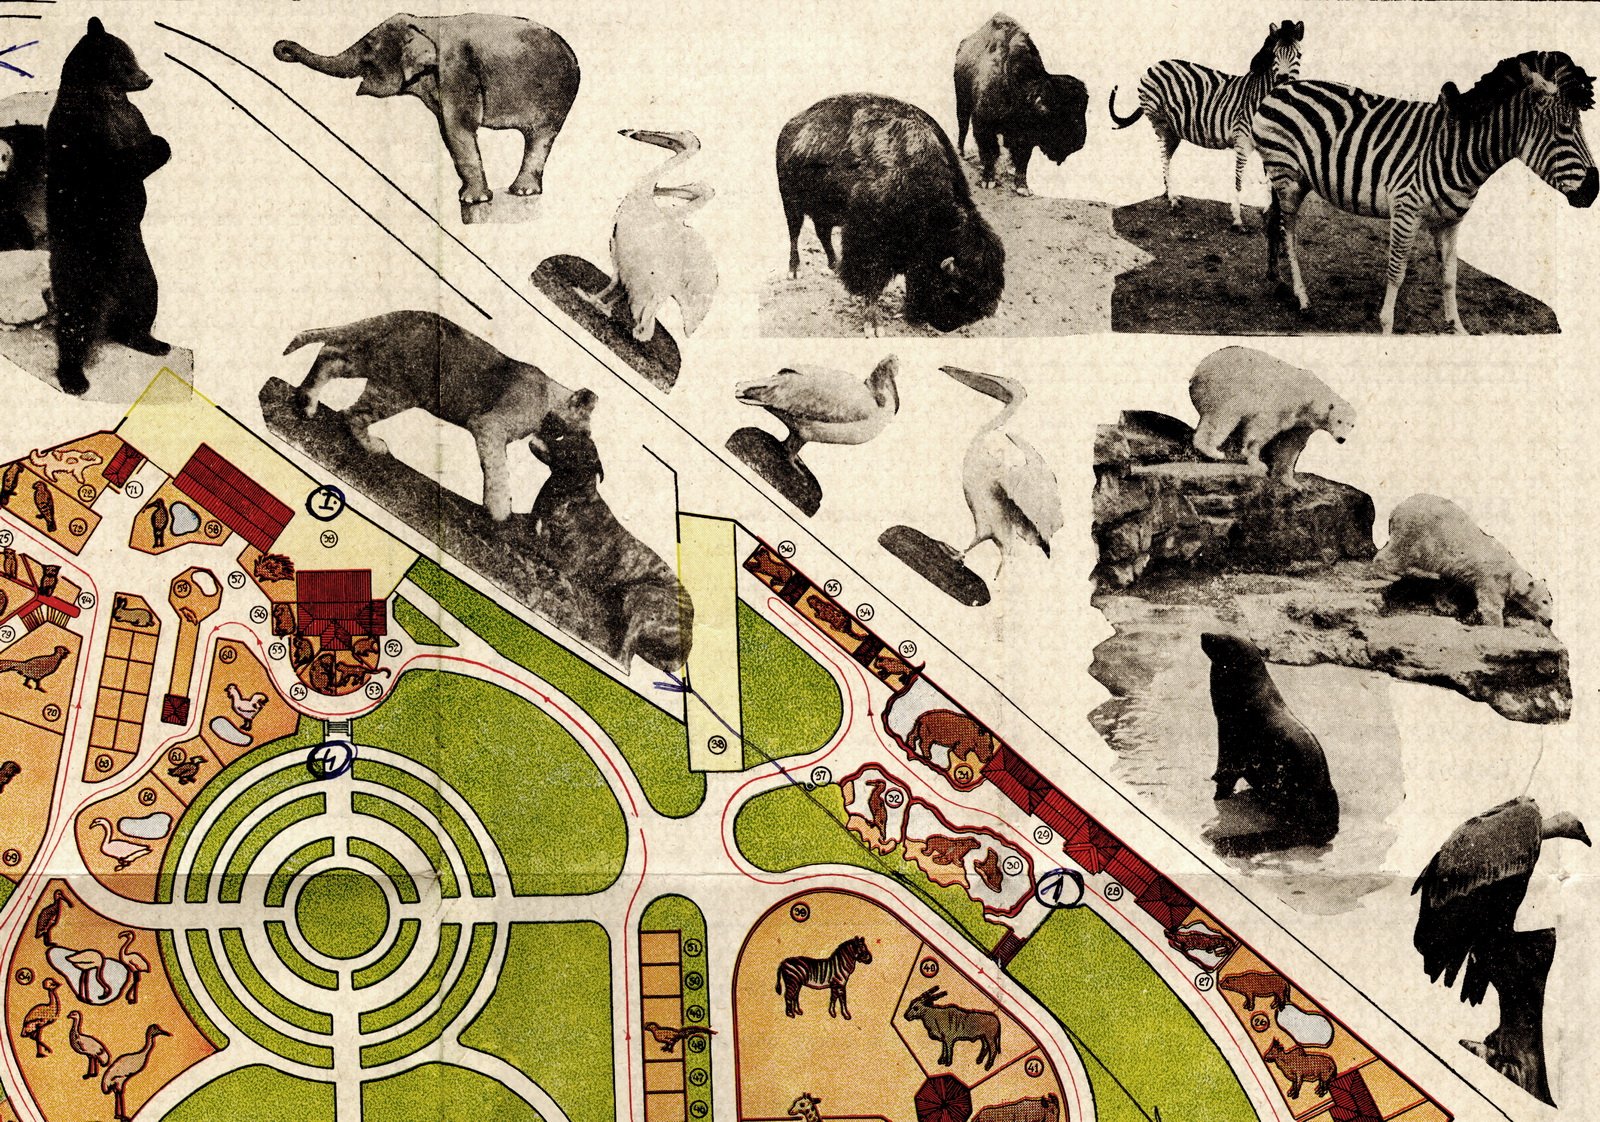 Upper-right corner of the map with photos of animals.